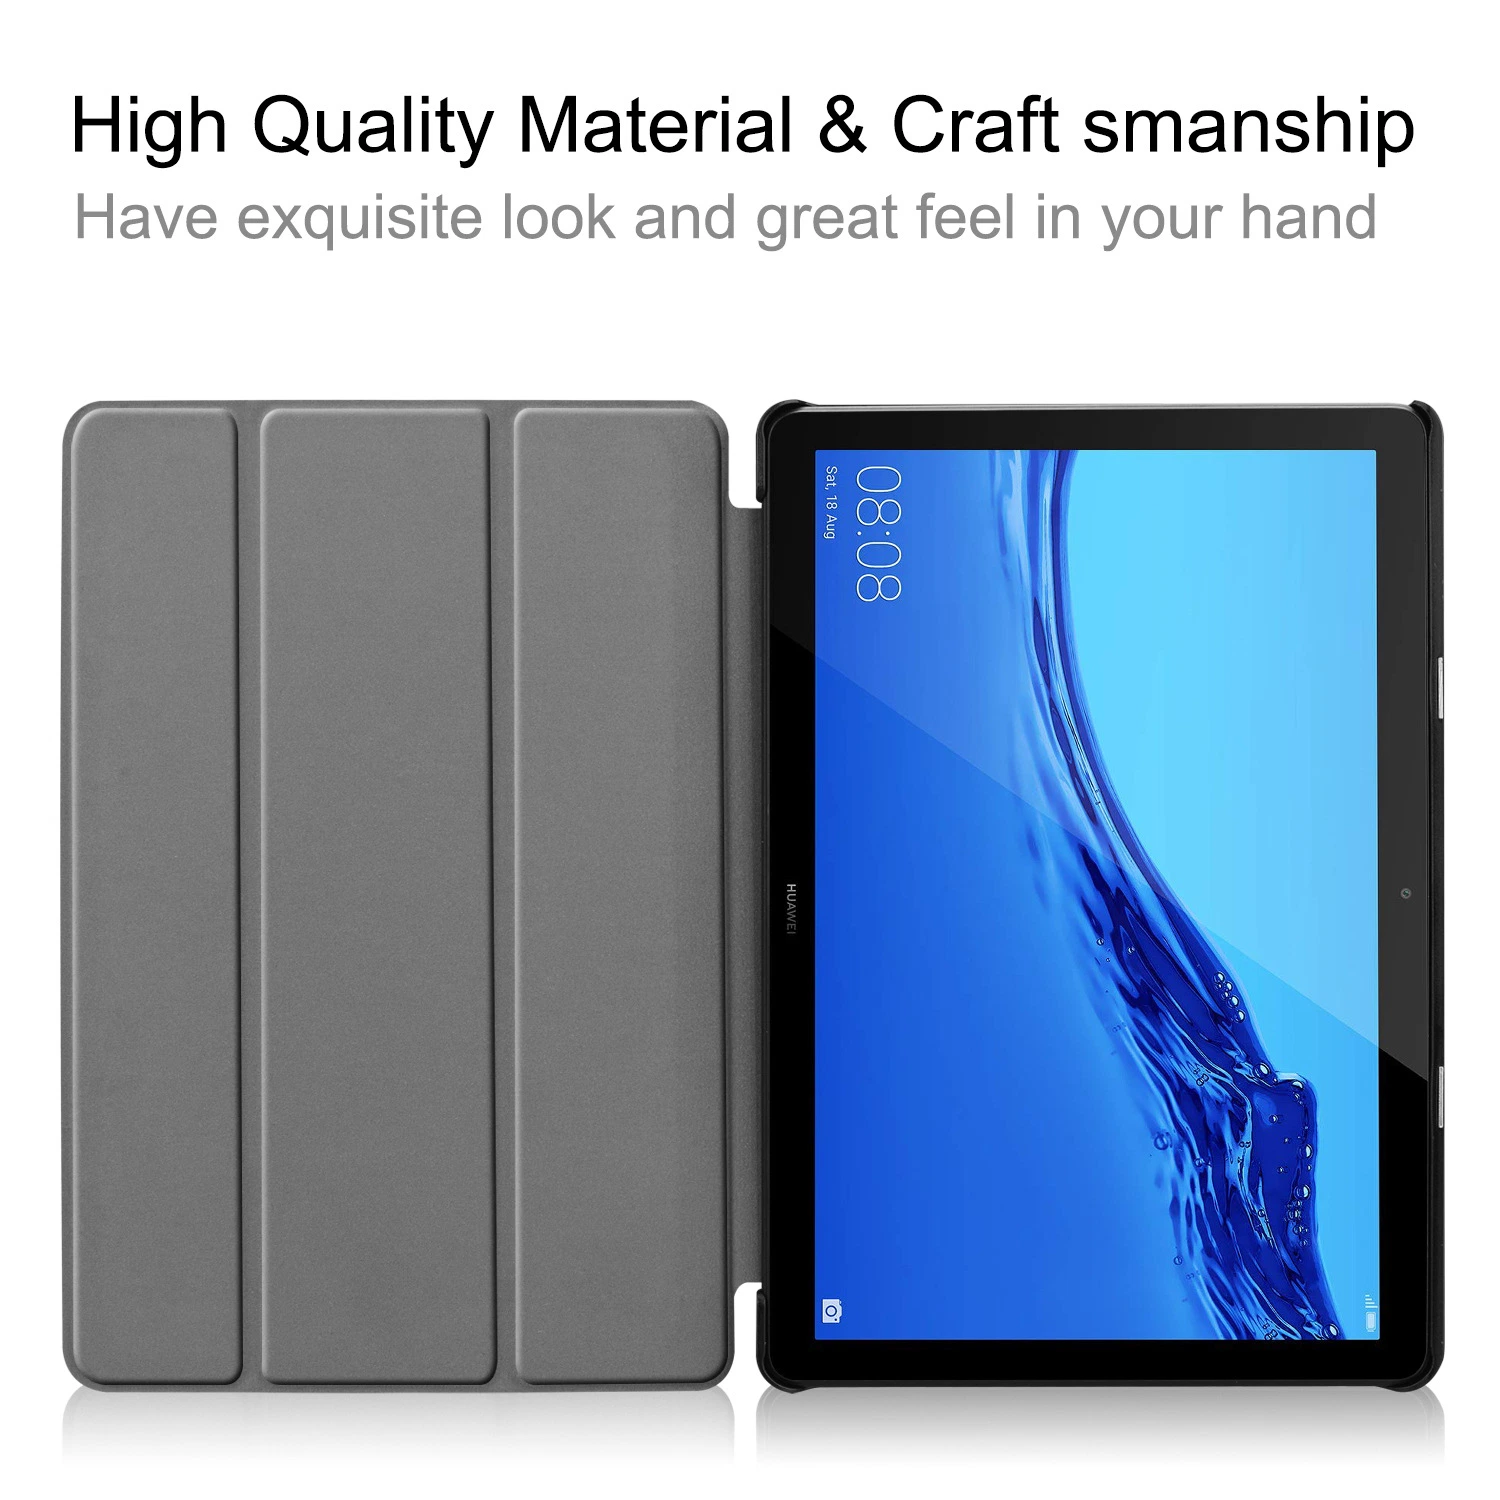 Premium Hard Protective Back Cover Slim Shell PU Leather Tri-Fold Smart Case for Huawei Matepad T5 10.1